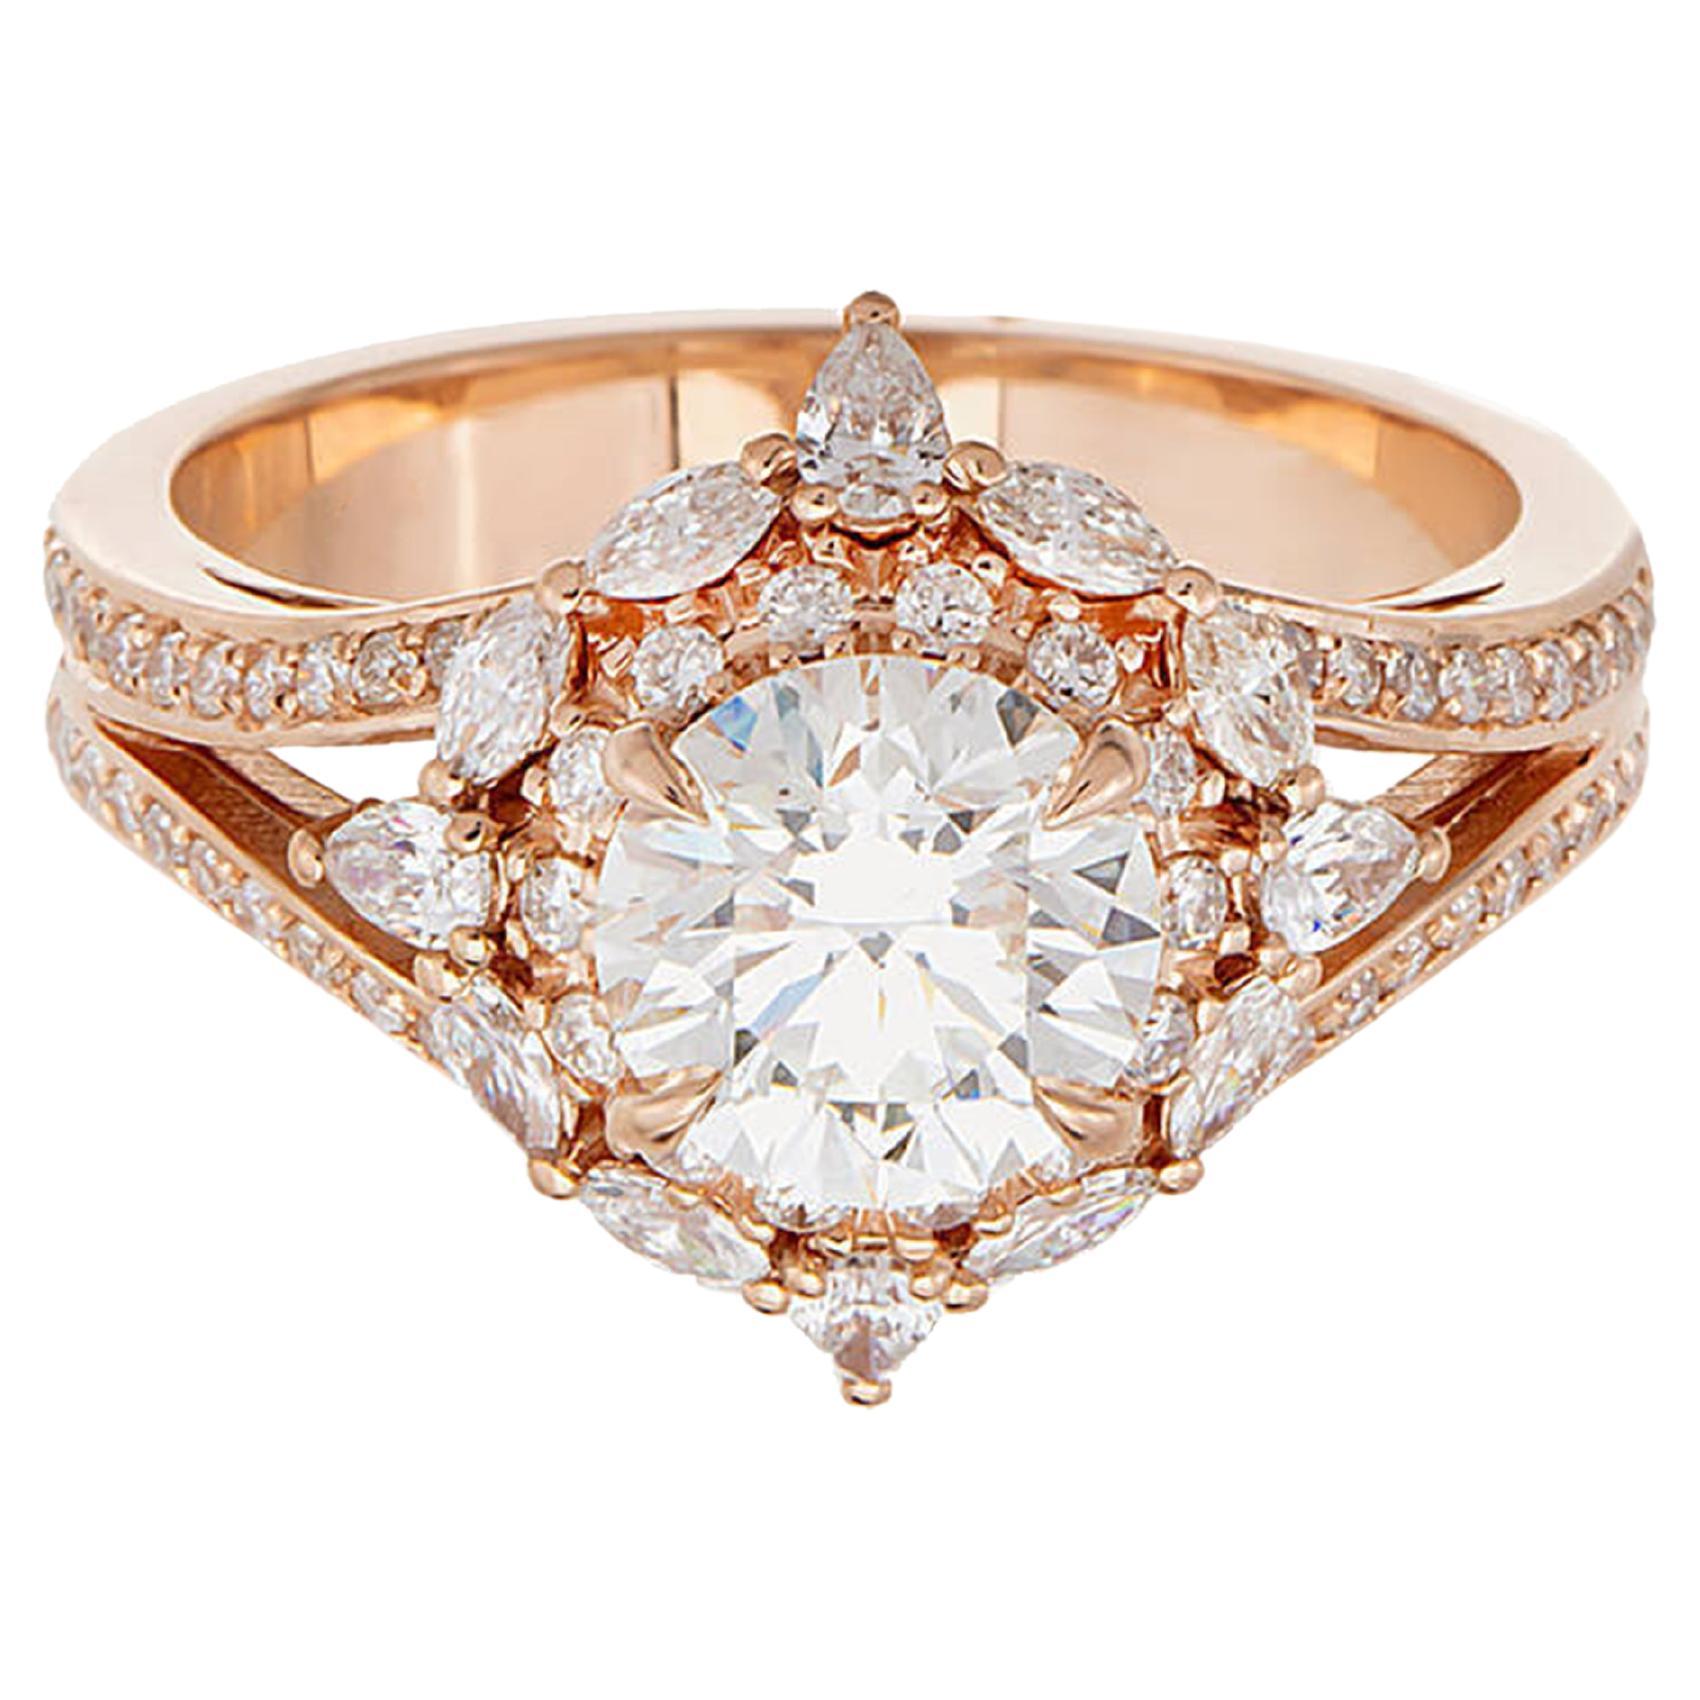 For Sale:  2.20 Carat Round, Pear and Marquise Cut Diamond 18K Rose Gold Ring